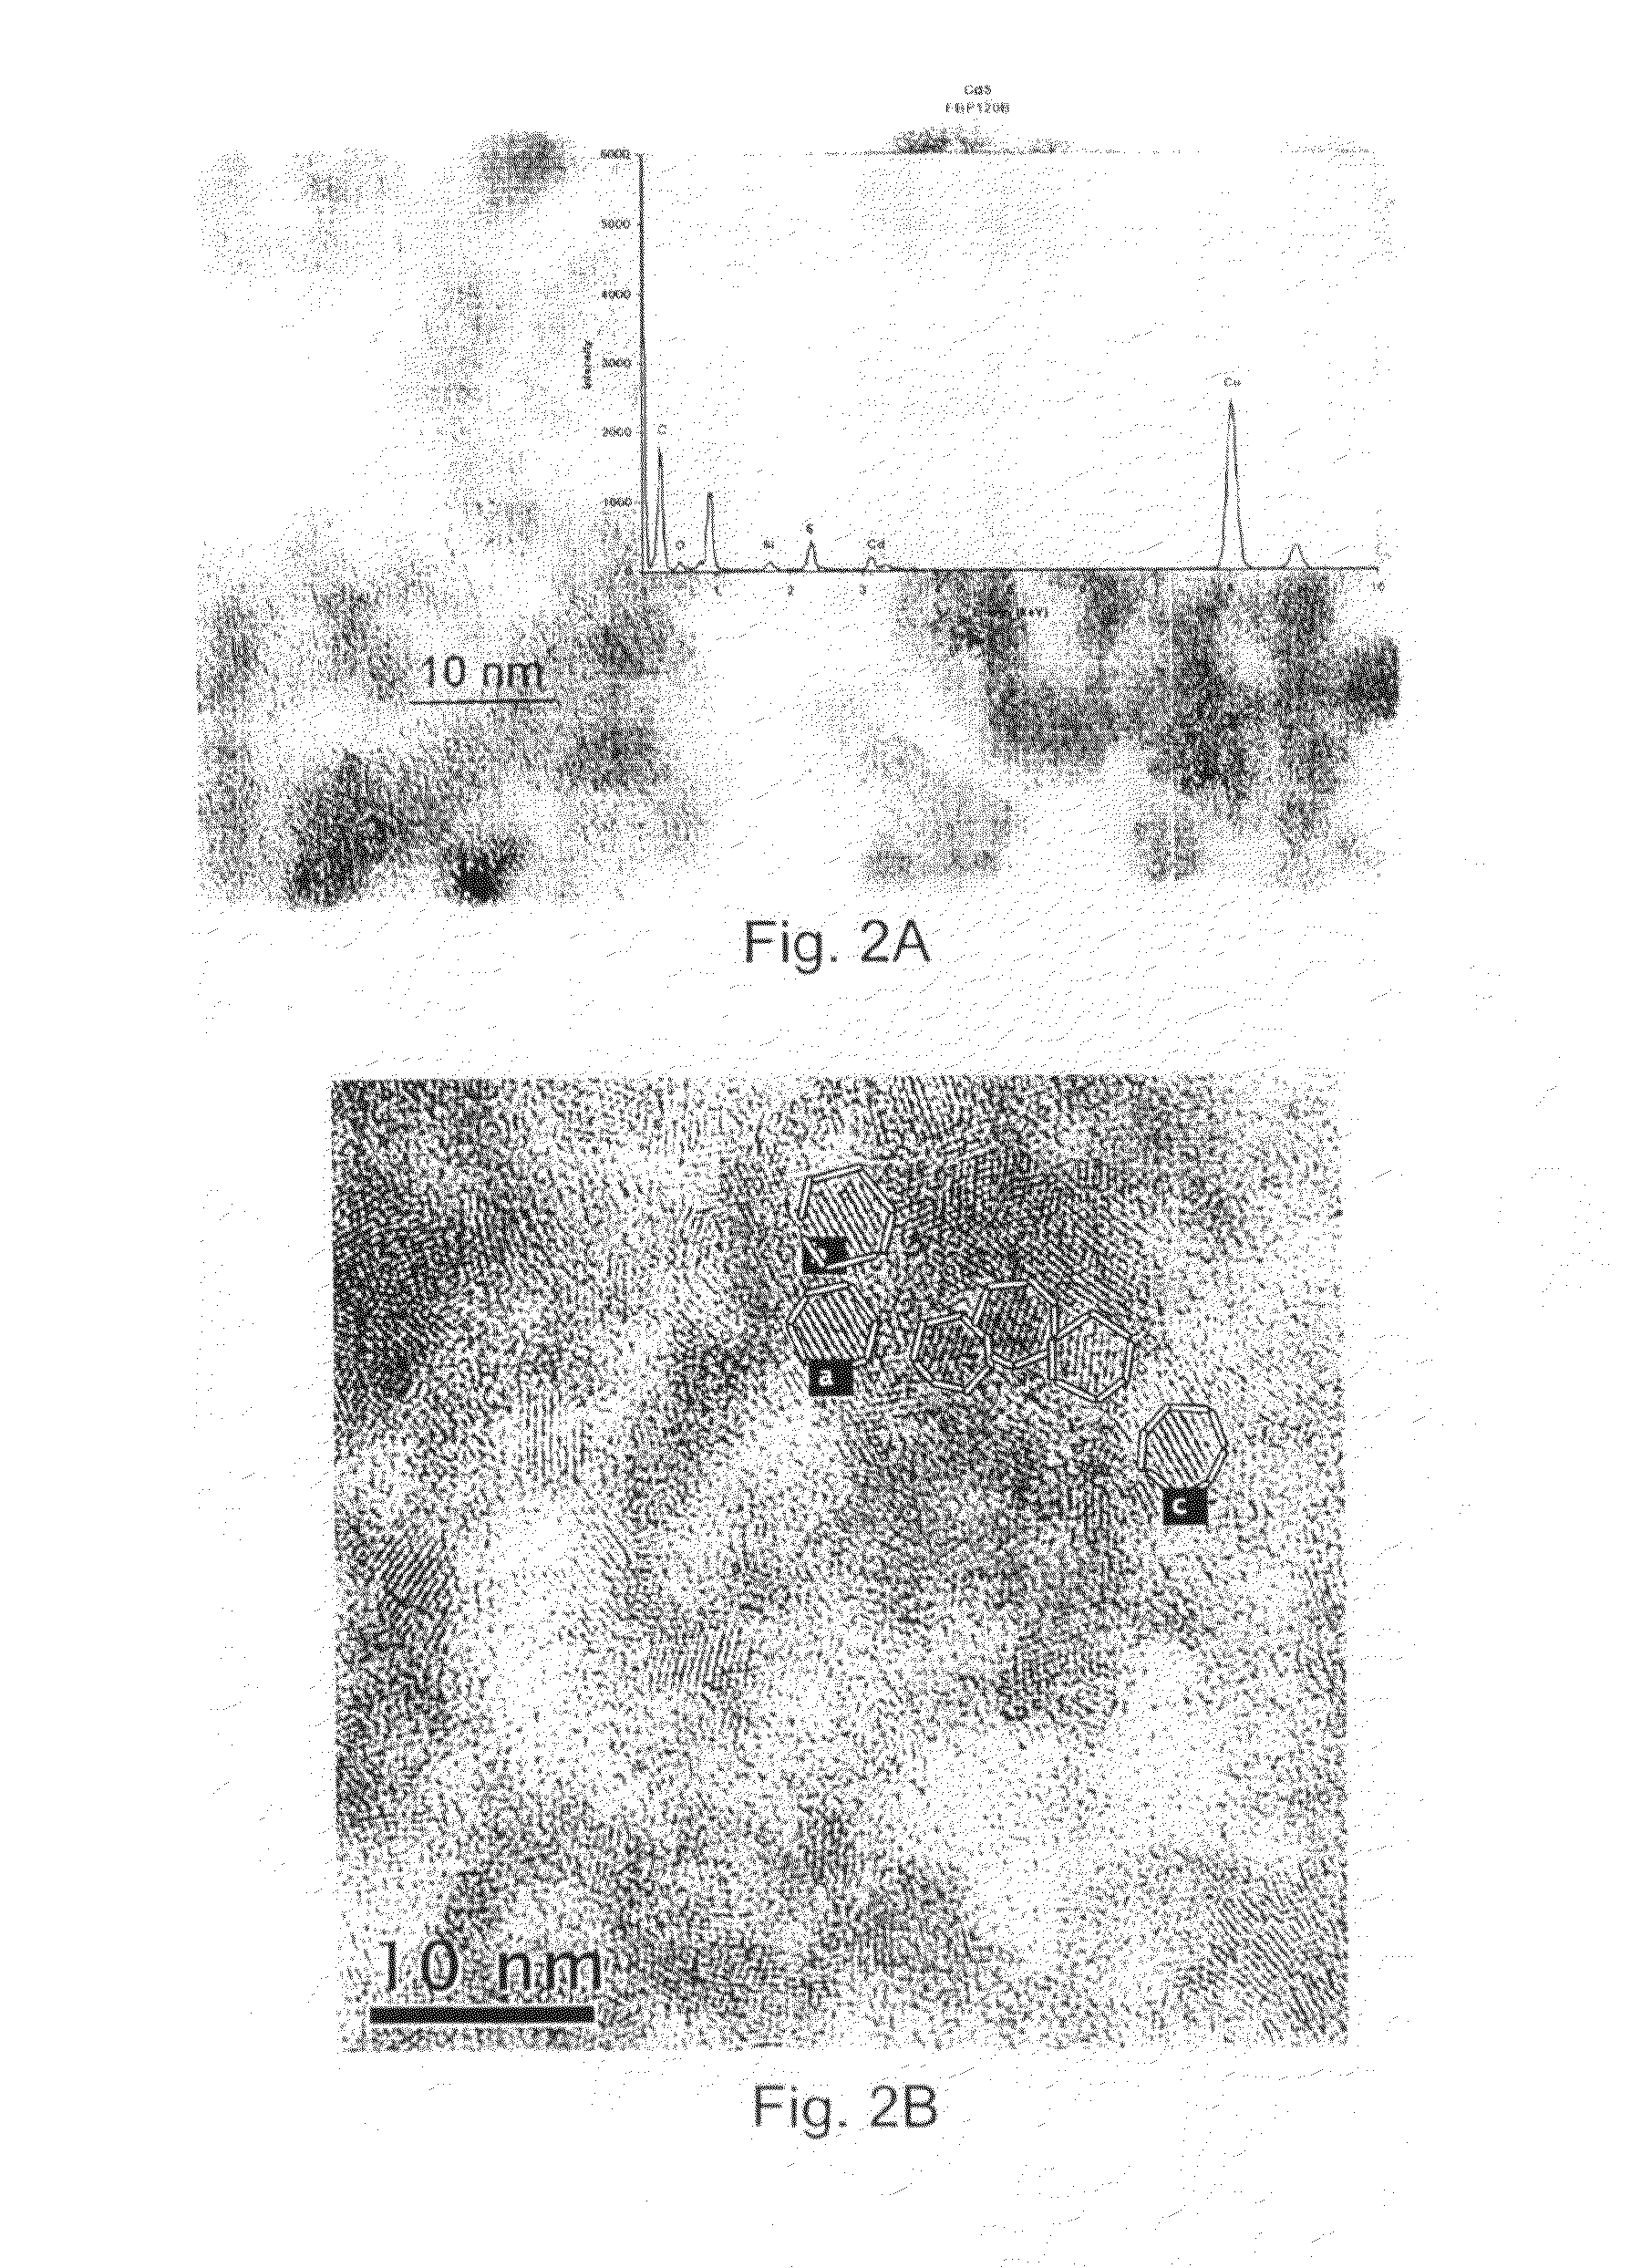 Hybrid nanocomposite semiconductor material, and method of producing inorganic semiconductor therefor